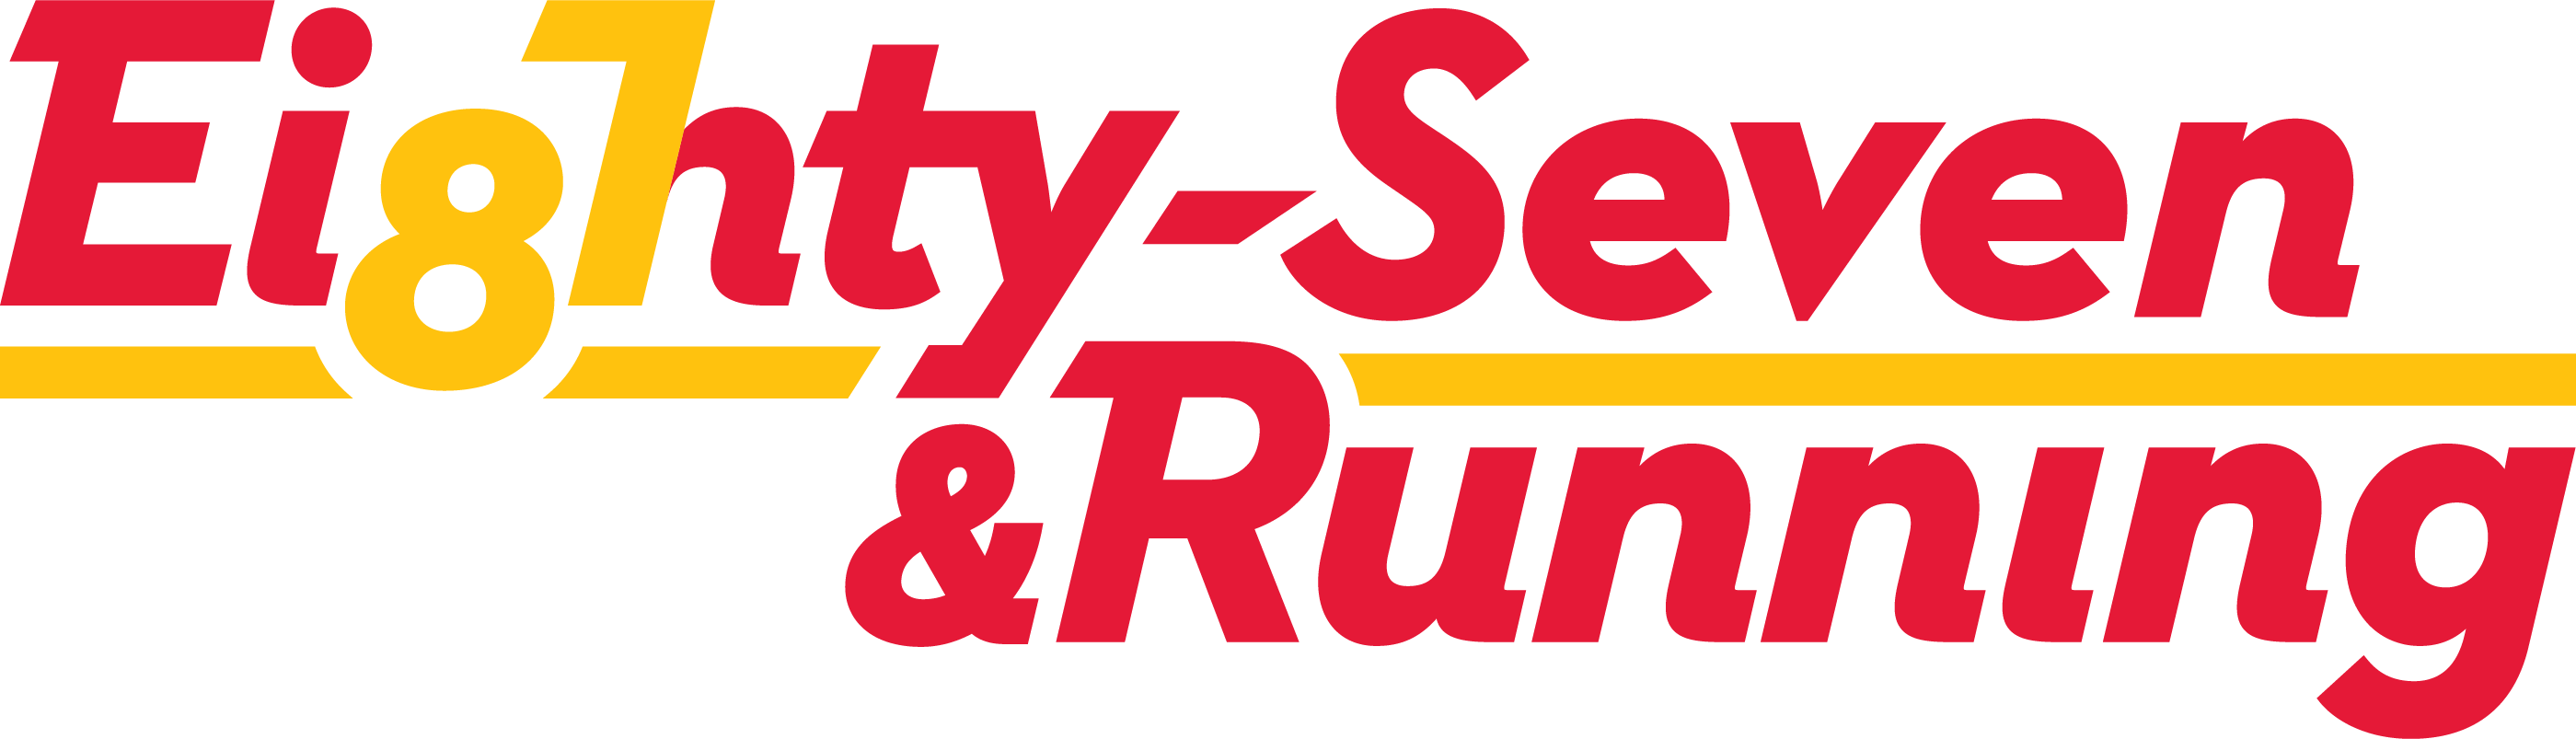 eighty seven and running logo in red and white